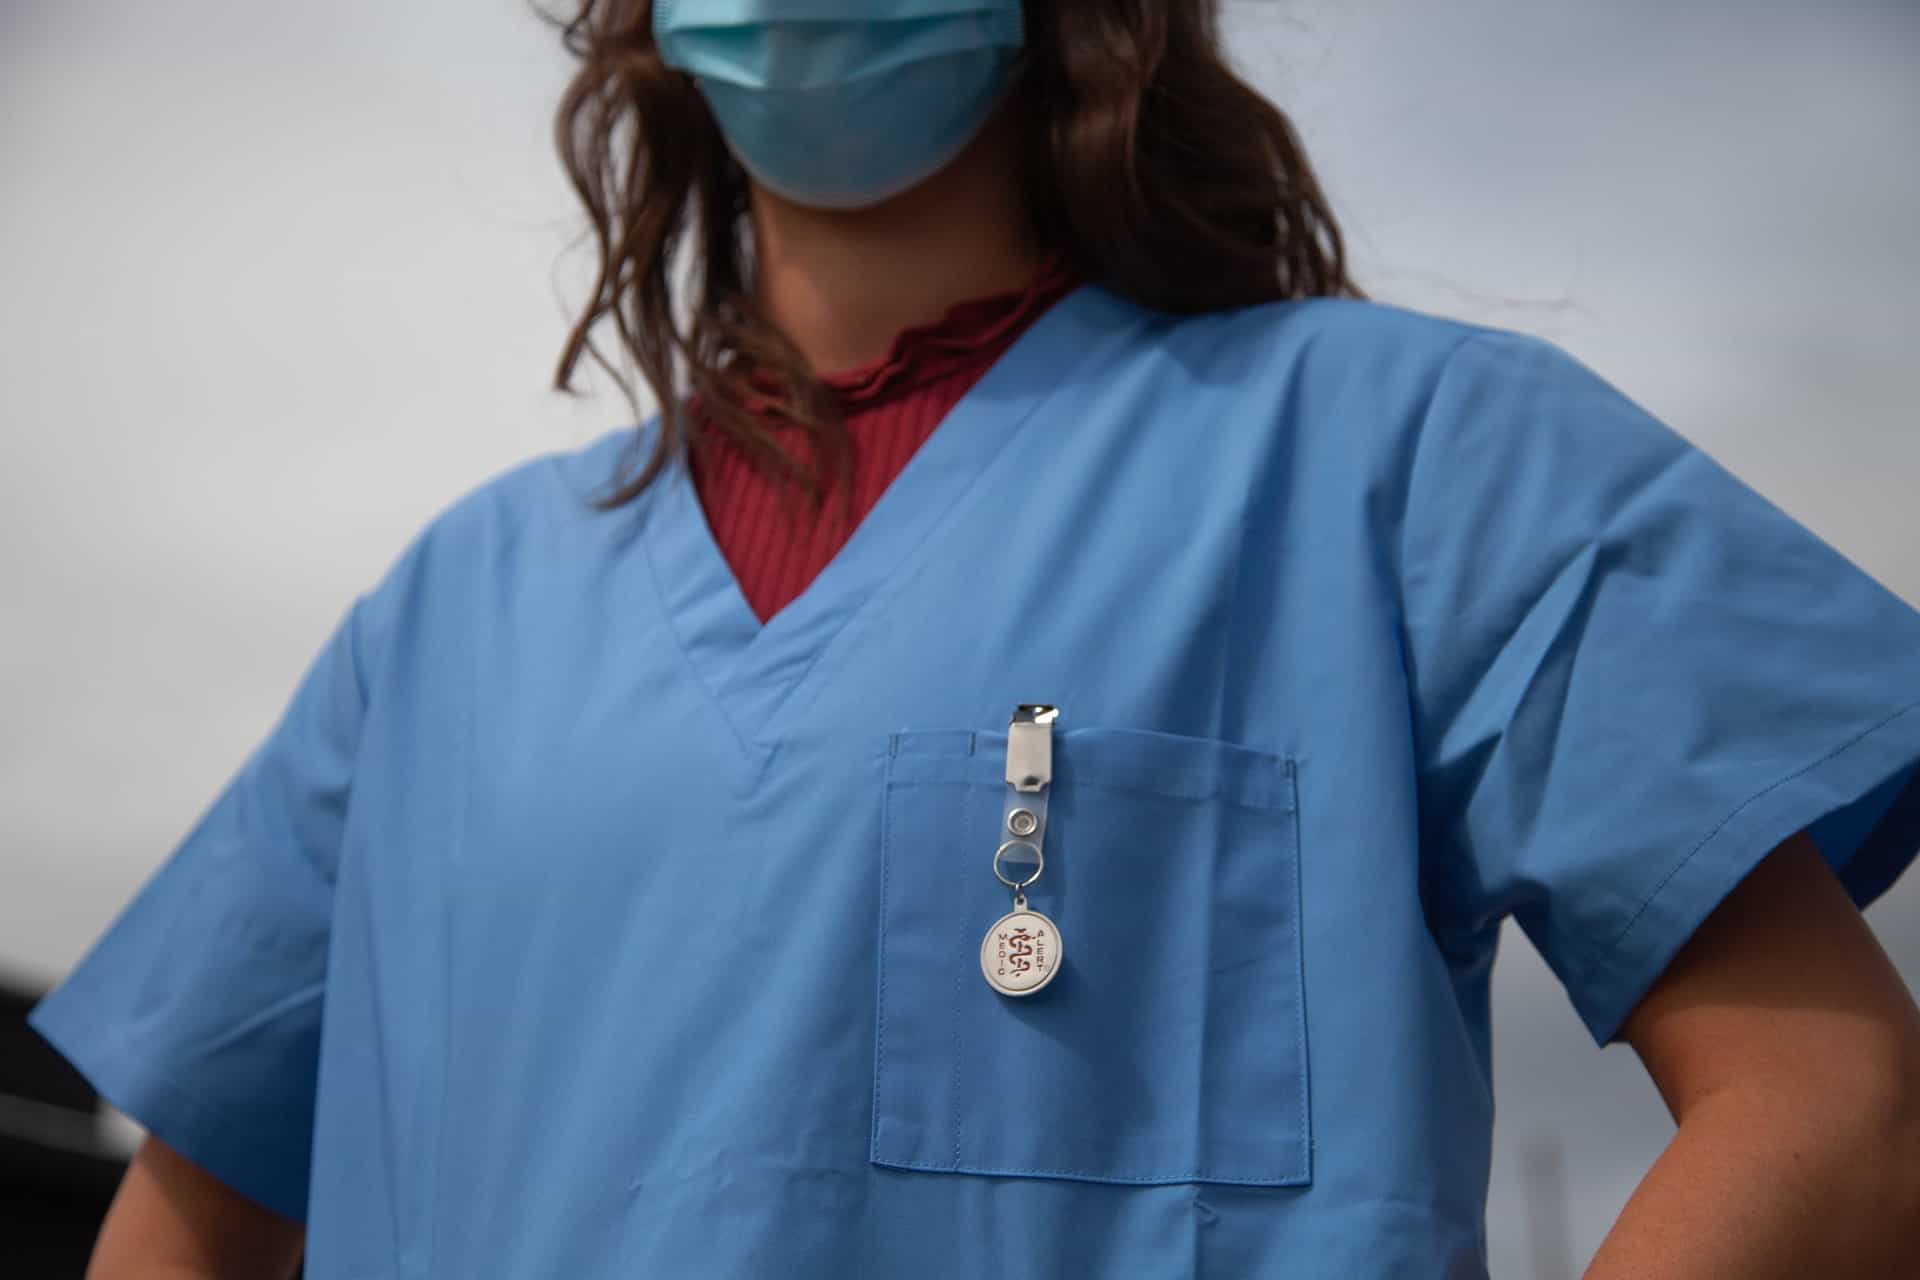 A female in blue scrubs with a front check pocket